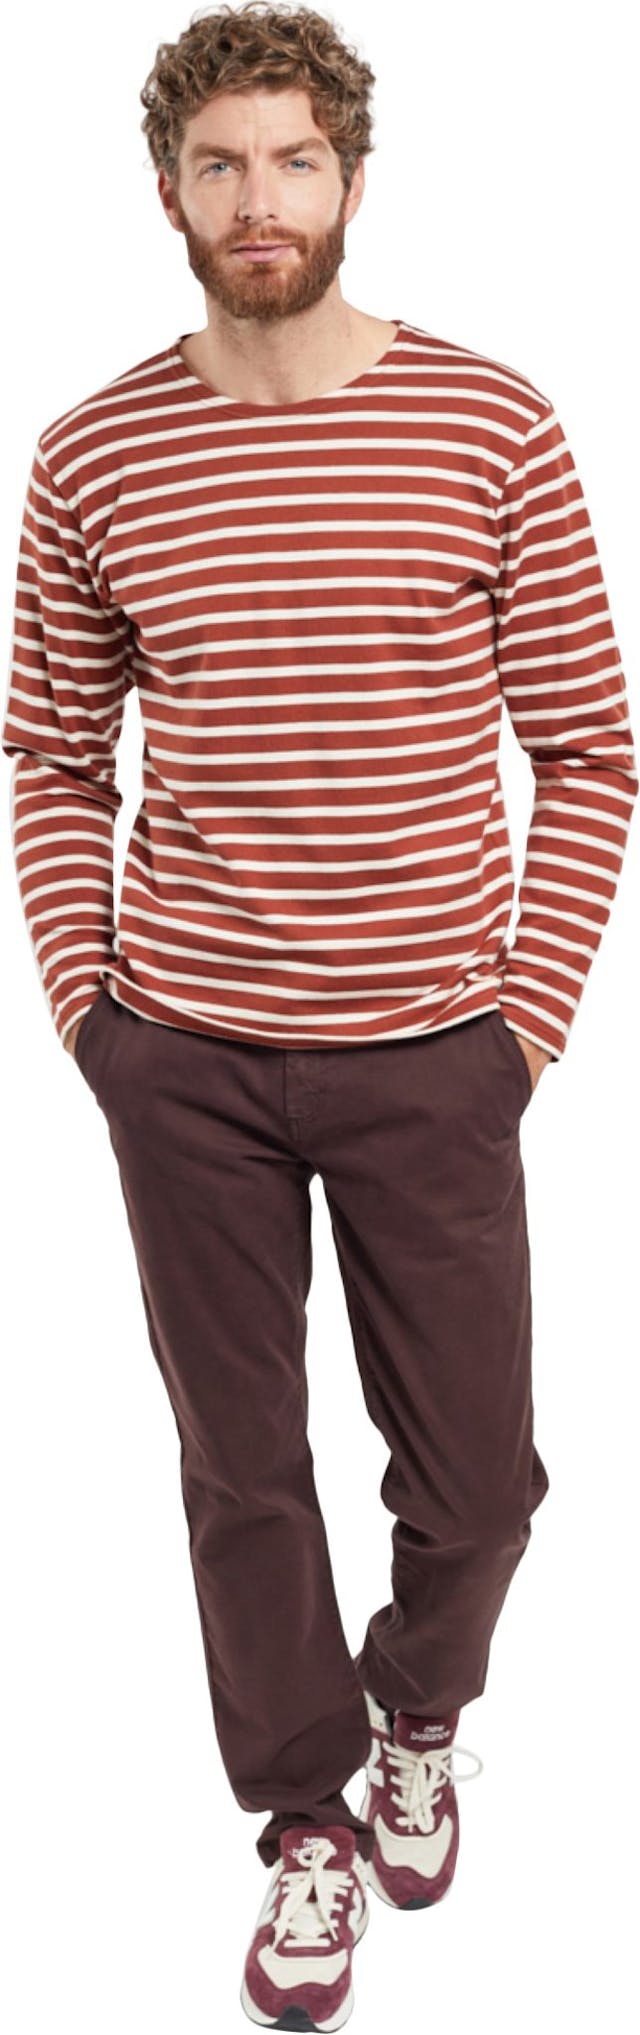 Product image for Rustic Cotton Breton Striped Jersey - Men's